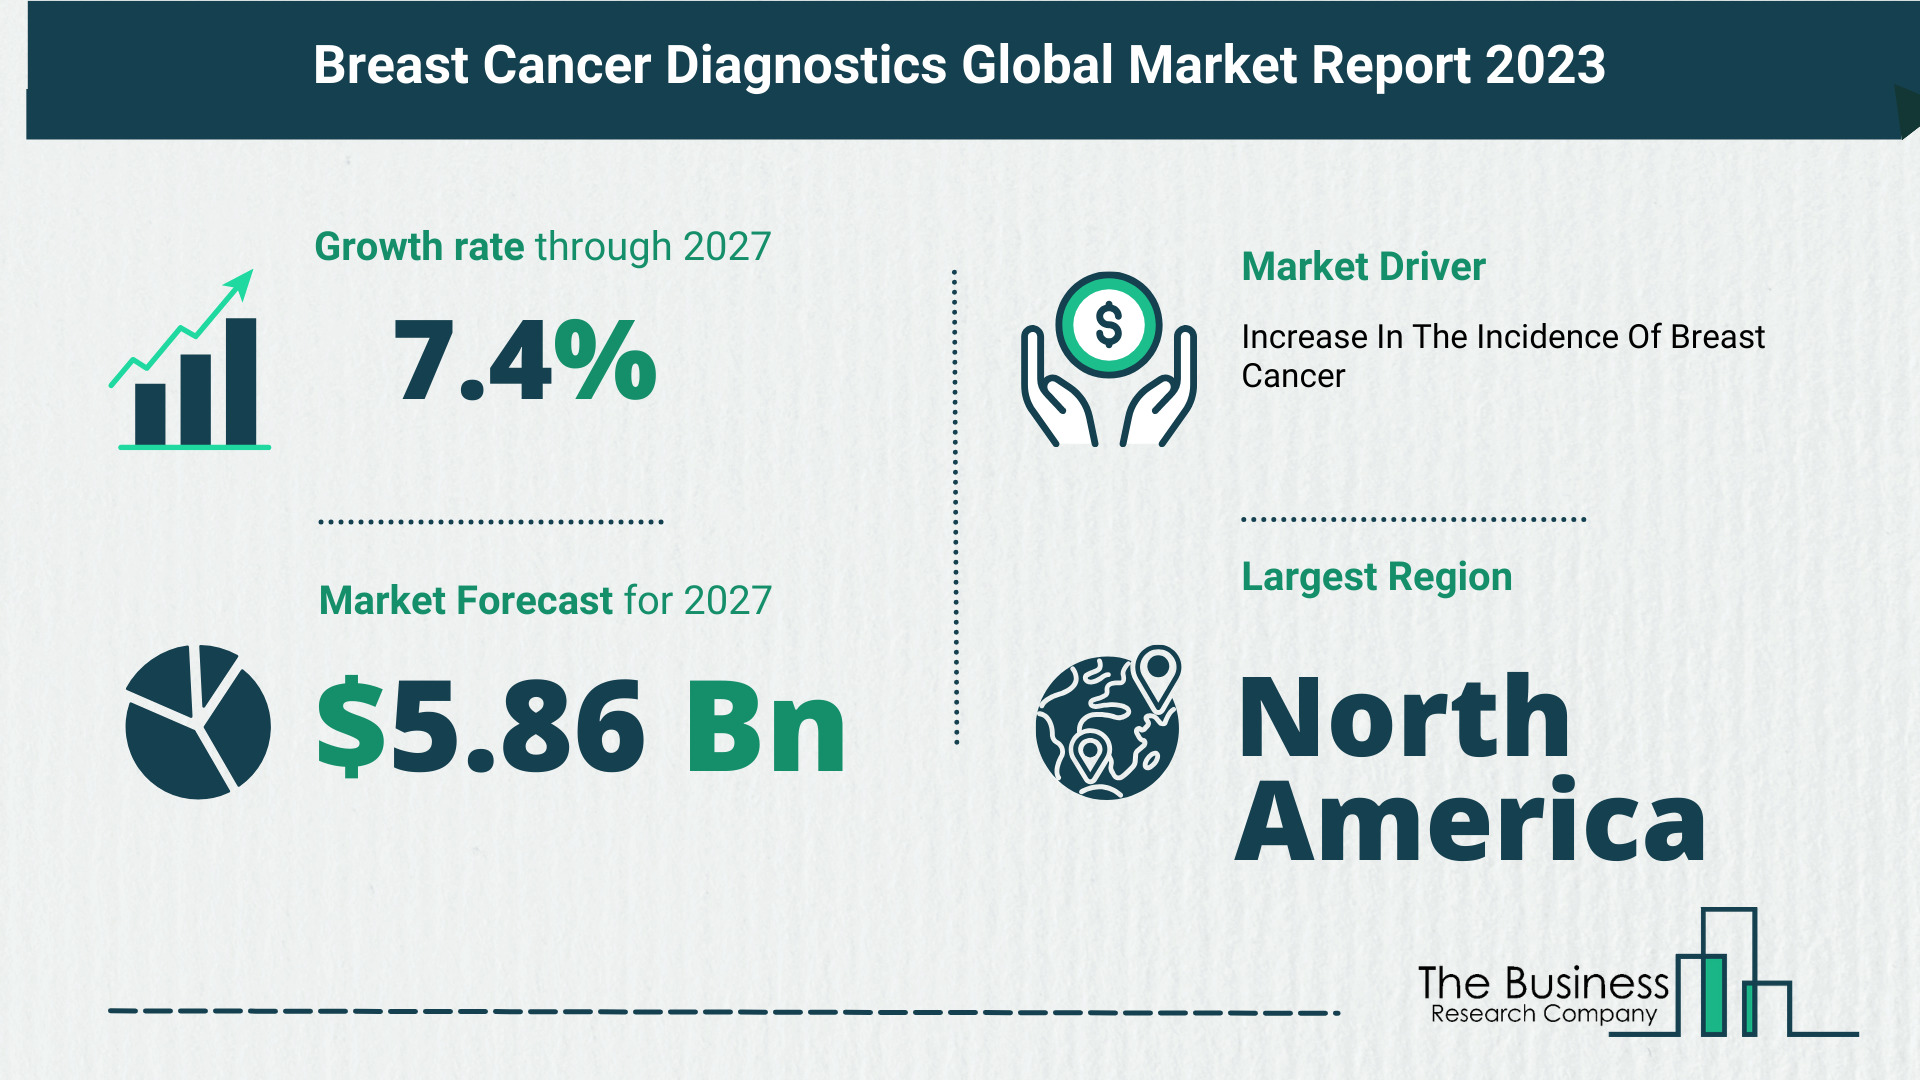 Key Takeaways From The Global Breast Cancer Diagnostics Market Forecast 2023